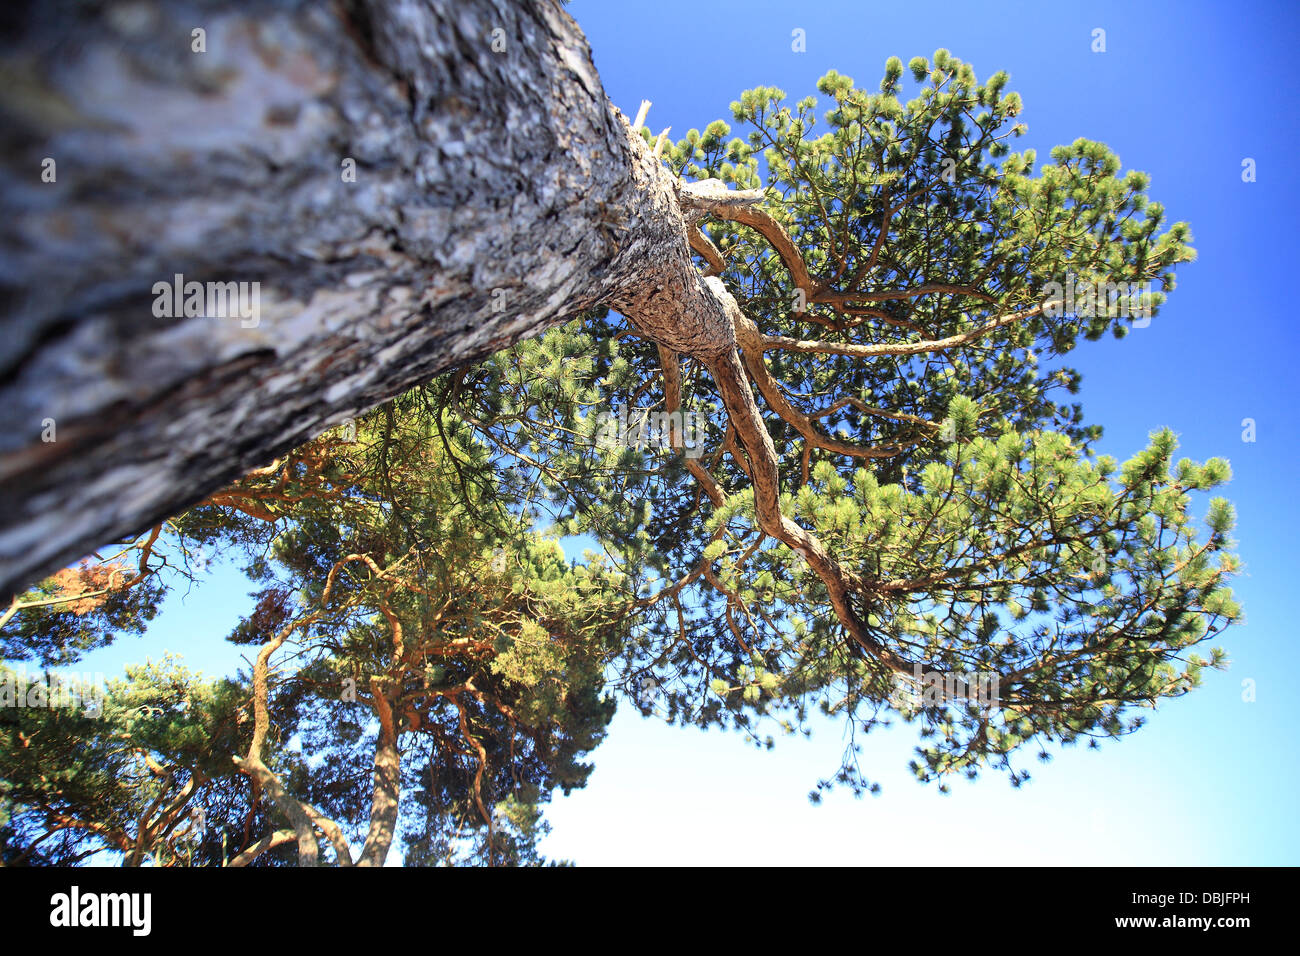 Upward looking shot of pine trees showing bark and canopy against a blue sky. Stock Photo